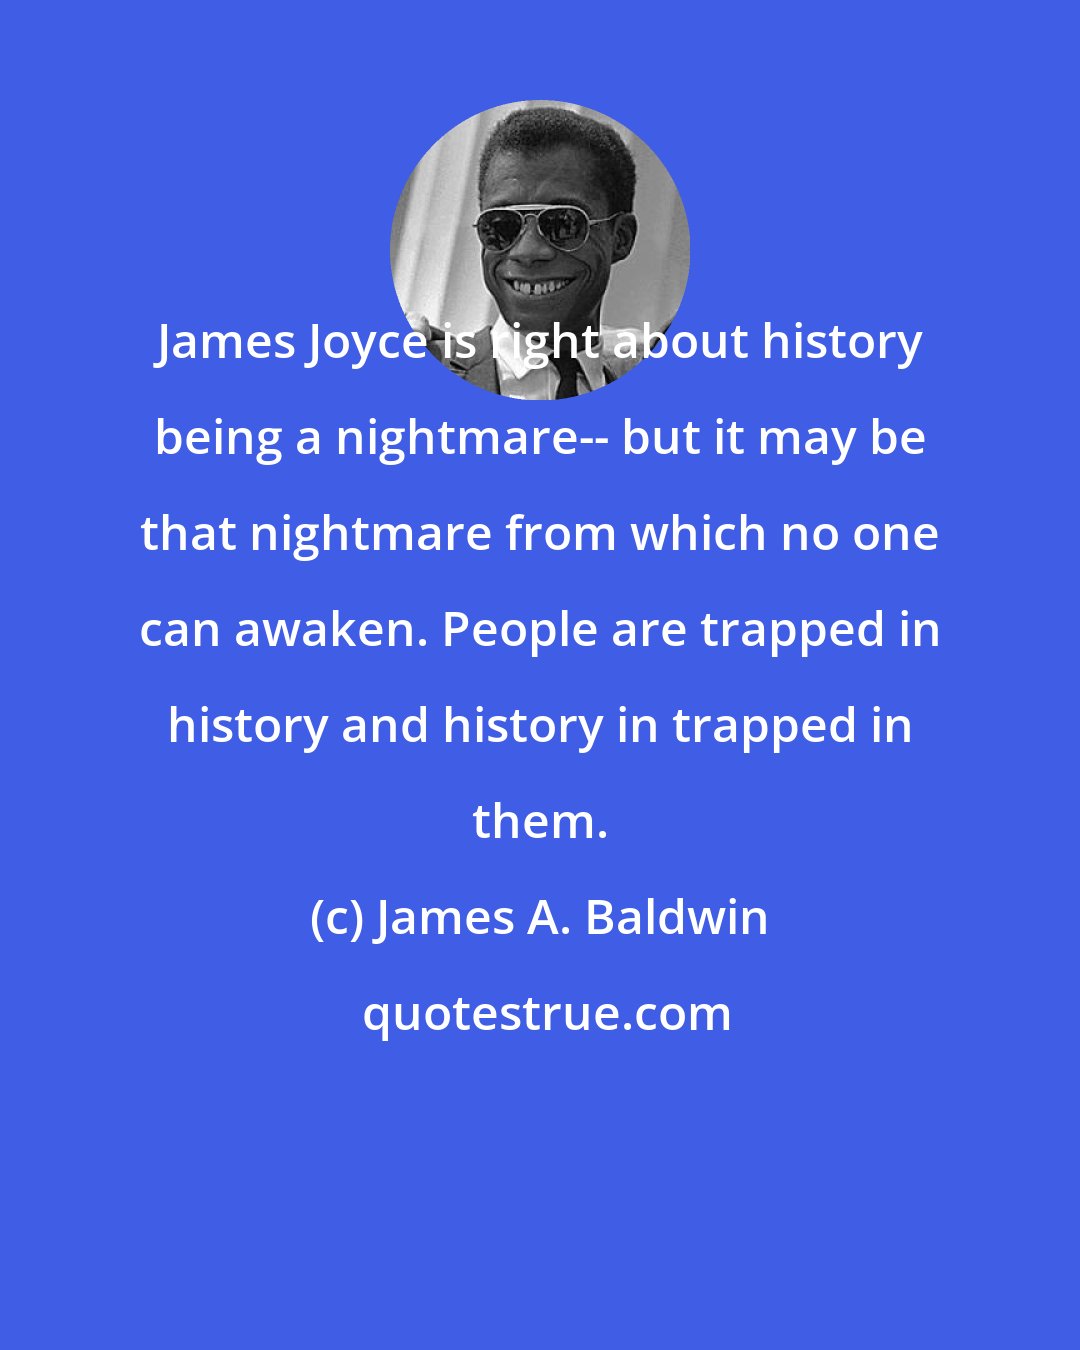 James A. Baldwin: James Joyce is right about history being a nightmare-- but it may be that nightmare from which no one can awaken. People are trapped in history and history in trapped in them.